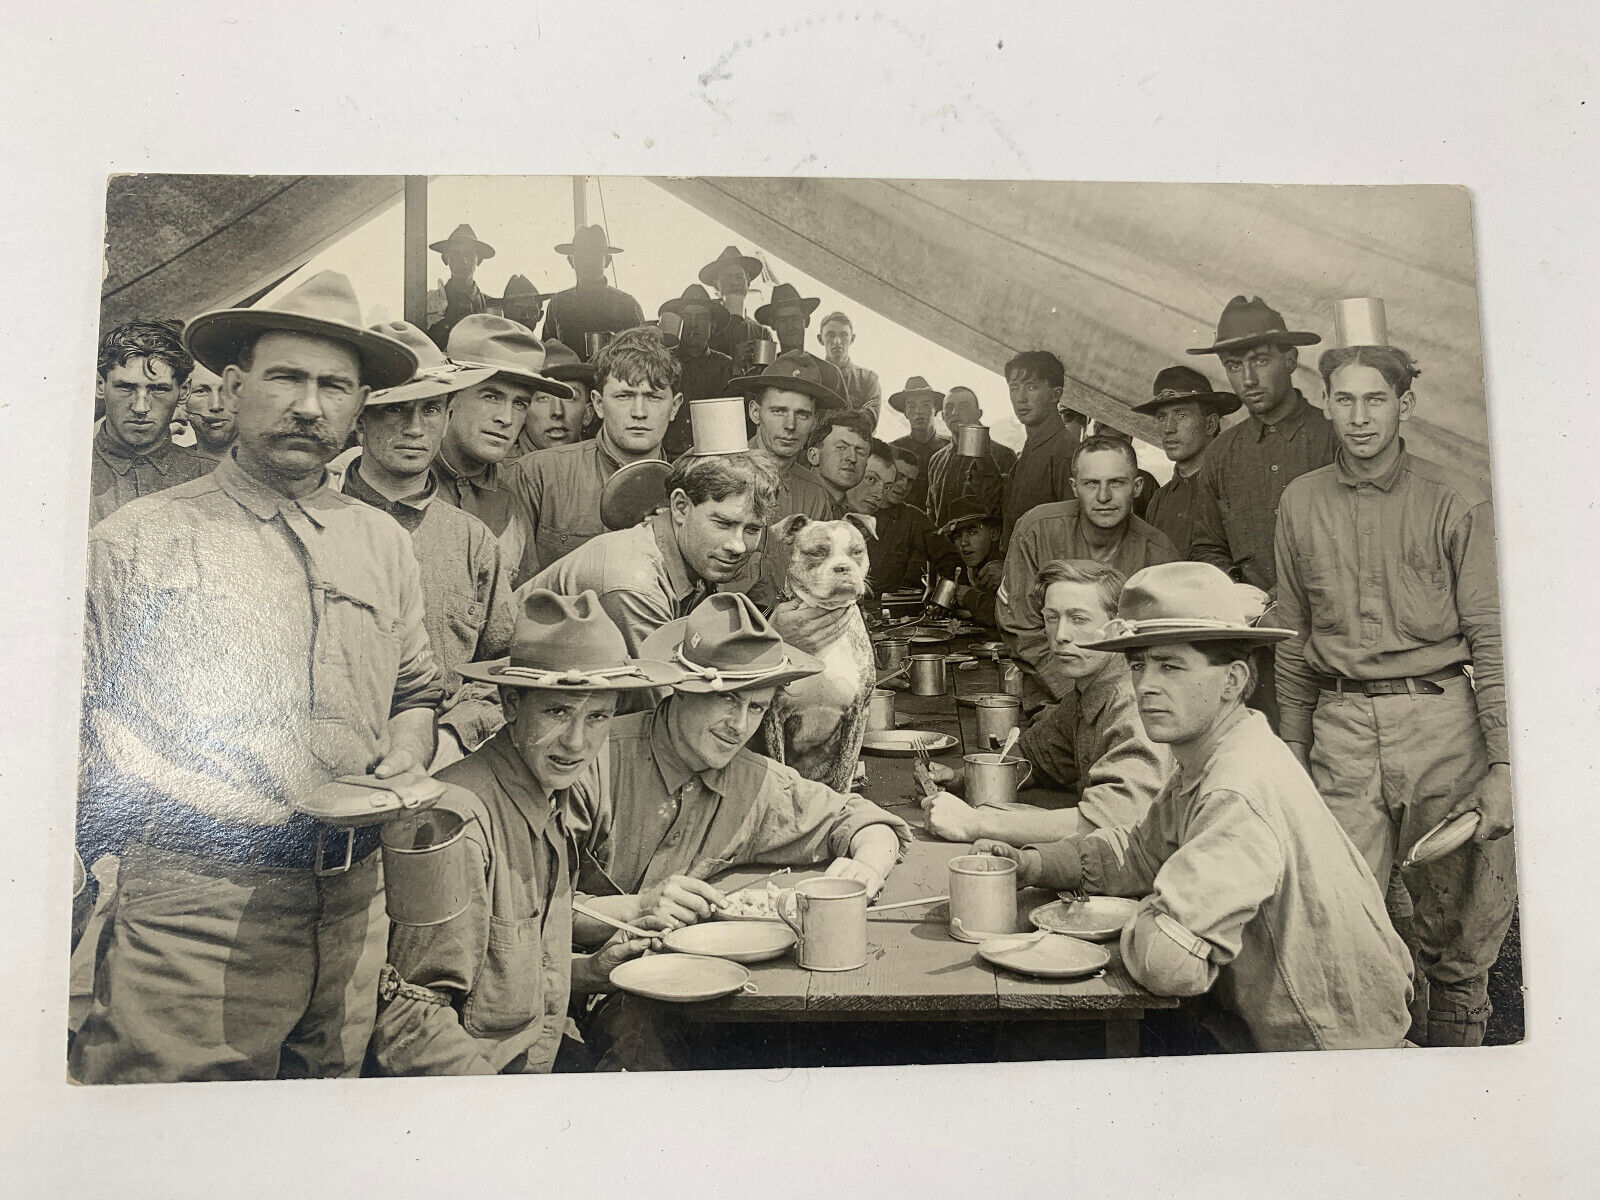 VTG RPPC WW1 3RD INFANTRY DIVISION SOLDIERS AT MESS W/MASCOT POSTCARD CIRCA 1917